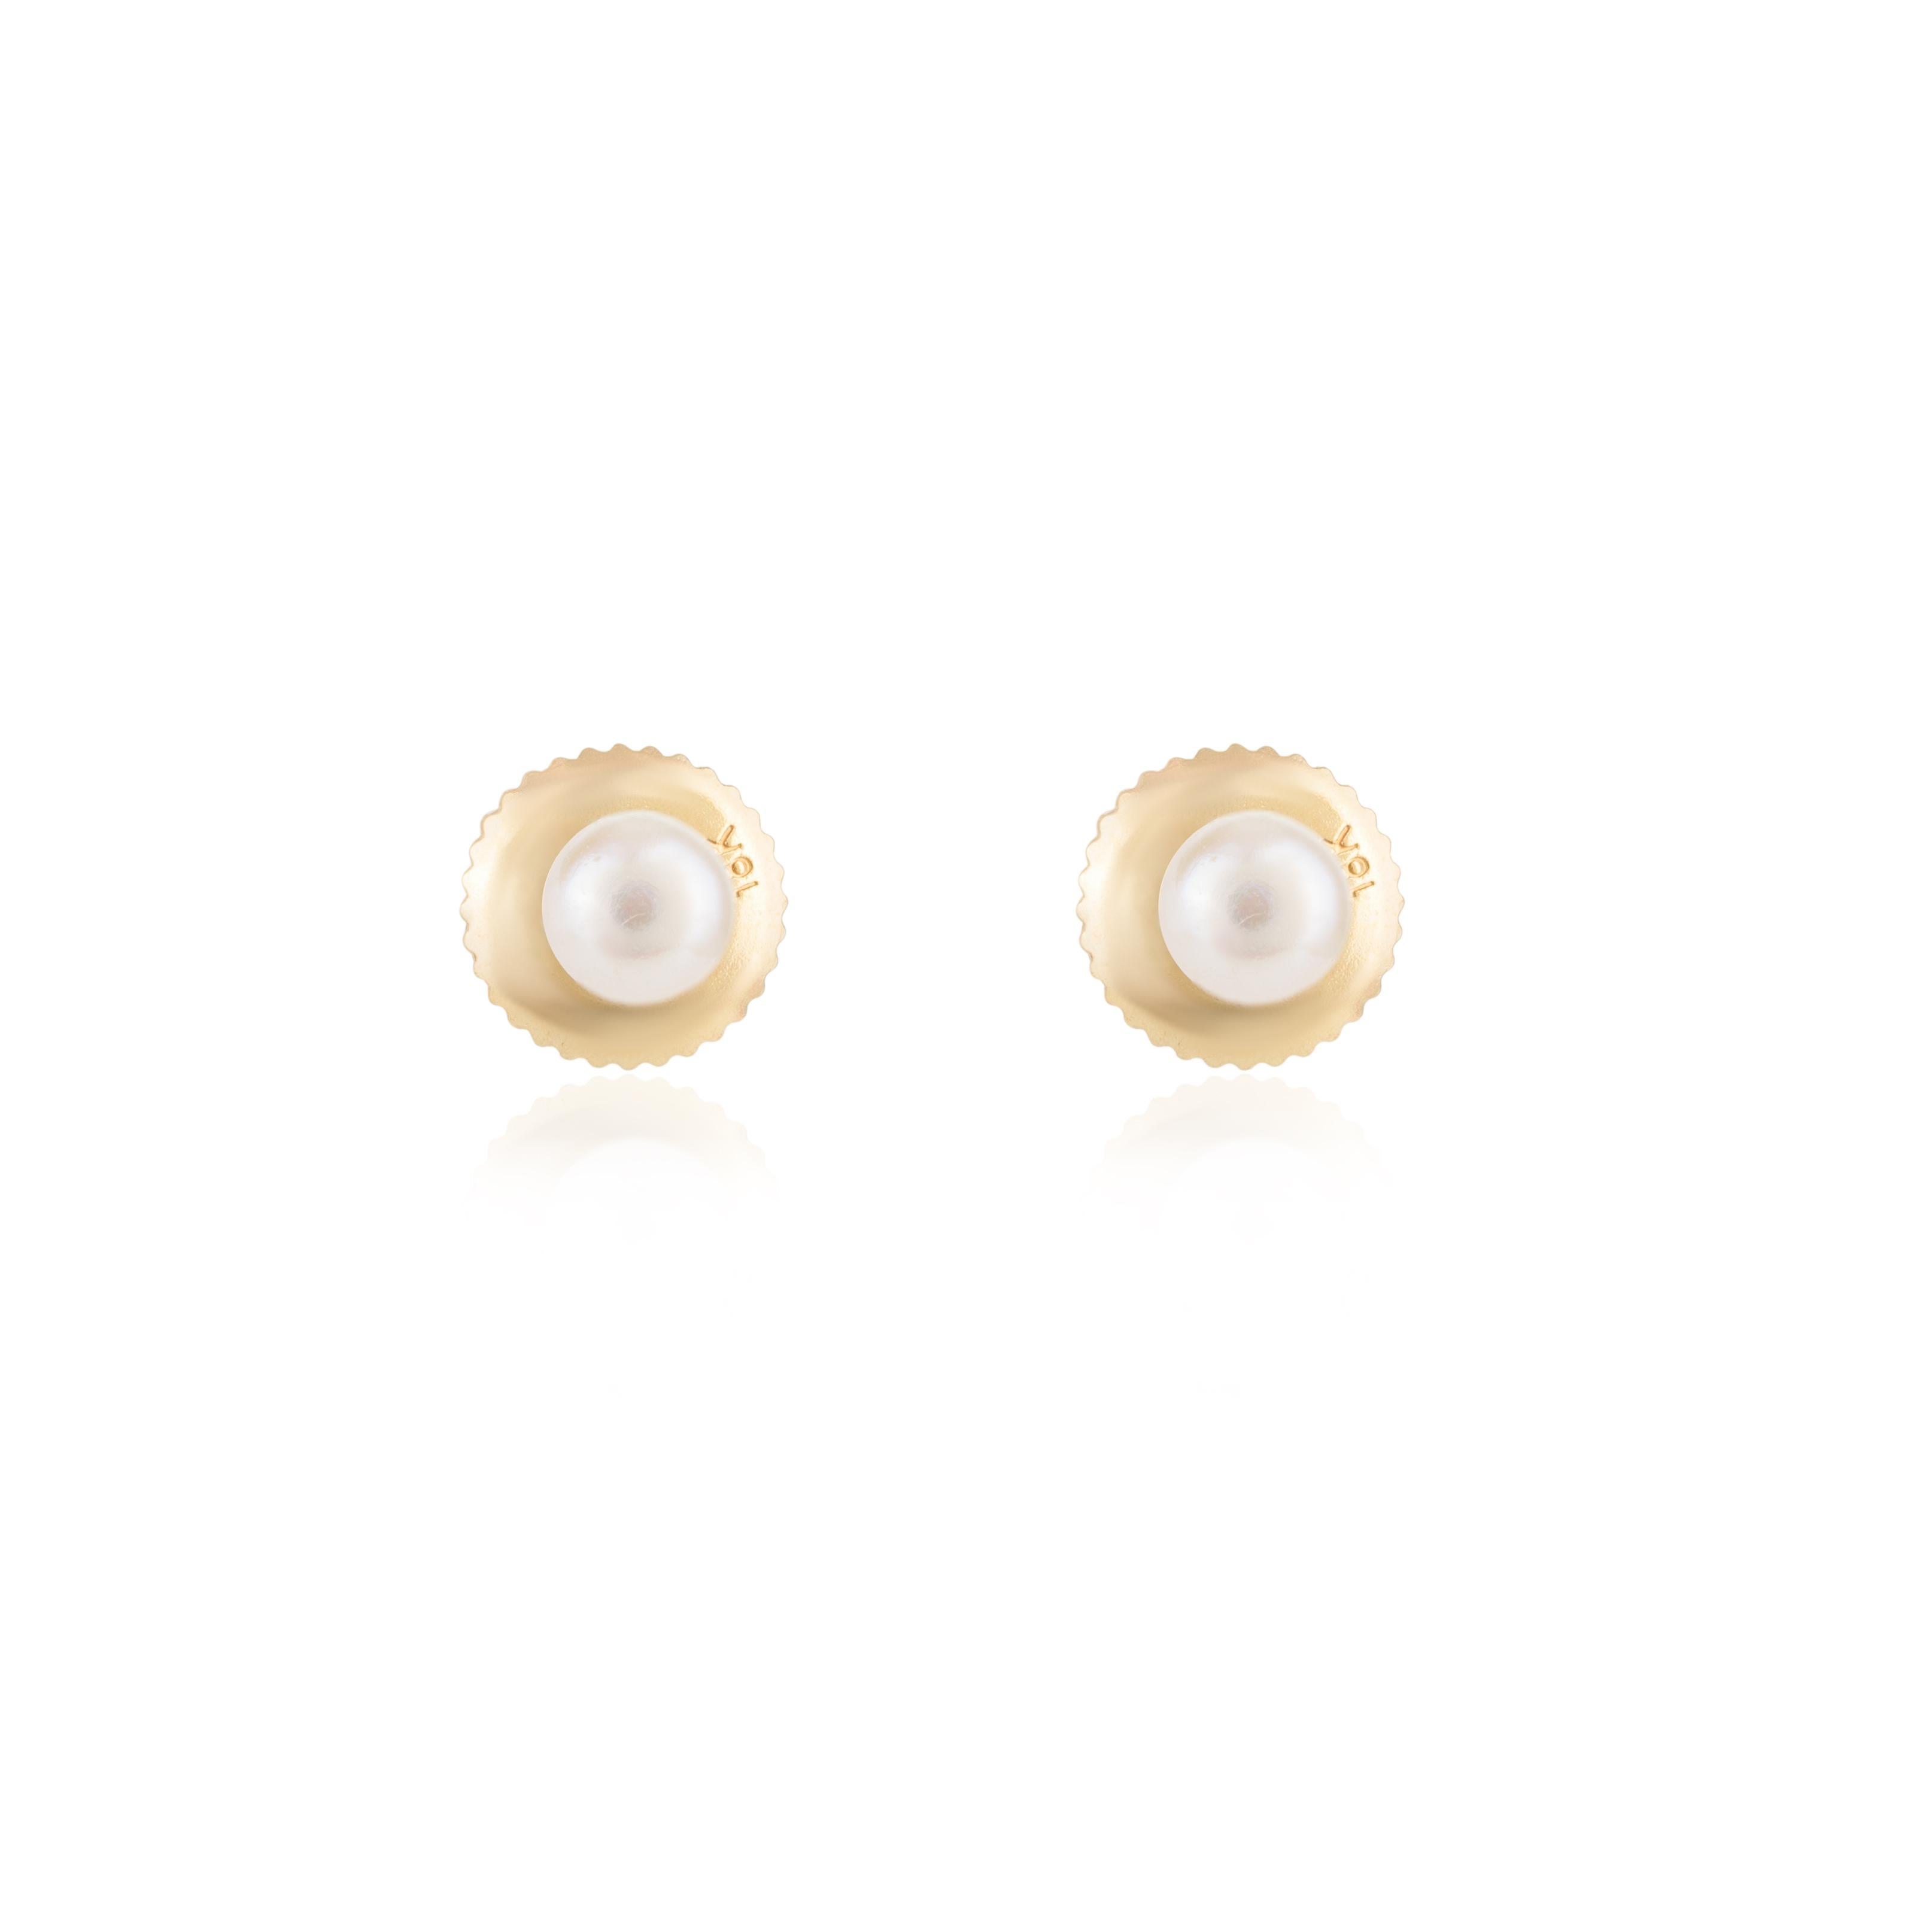 Dainty Everyday Pearl Stud Earrings in 18K Gold to make a statement with your look. You shall need stud earrings to make a statement with your look. These earrings create a sparkling, luxurious look featuring round cut pearl.
Pearl symbolizes